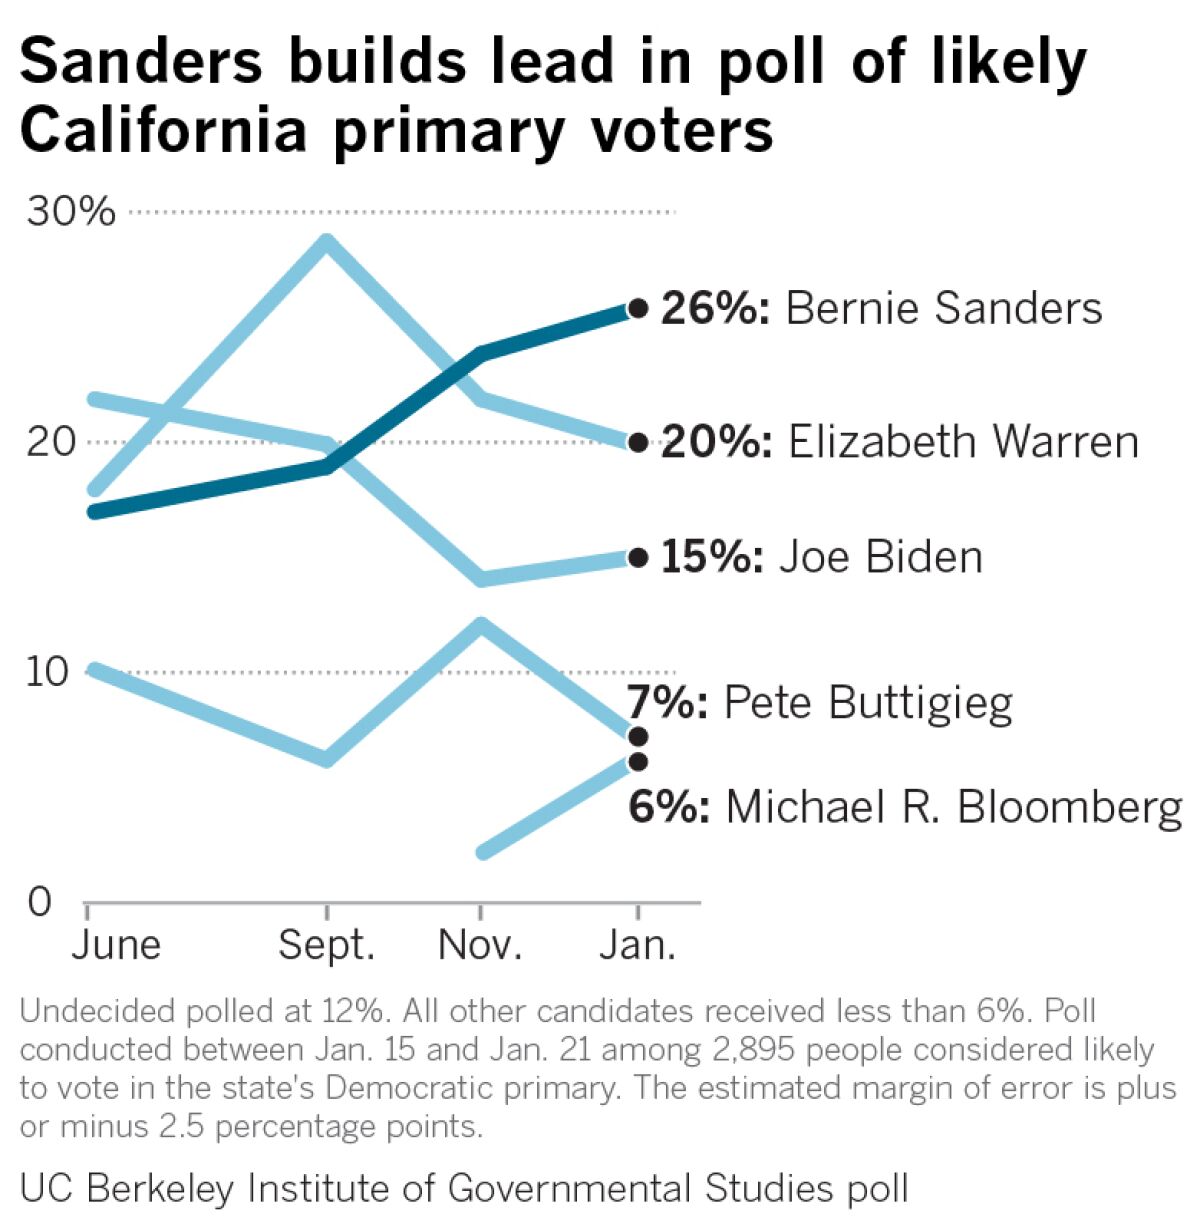 Sanders maintains lead in poll of California primary voters